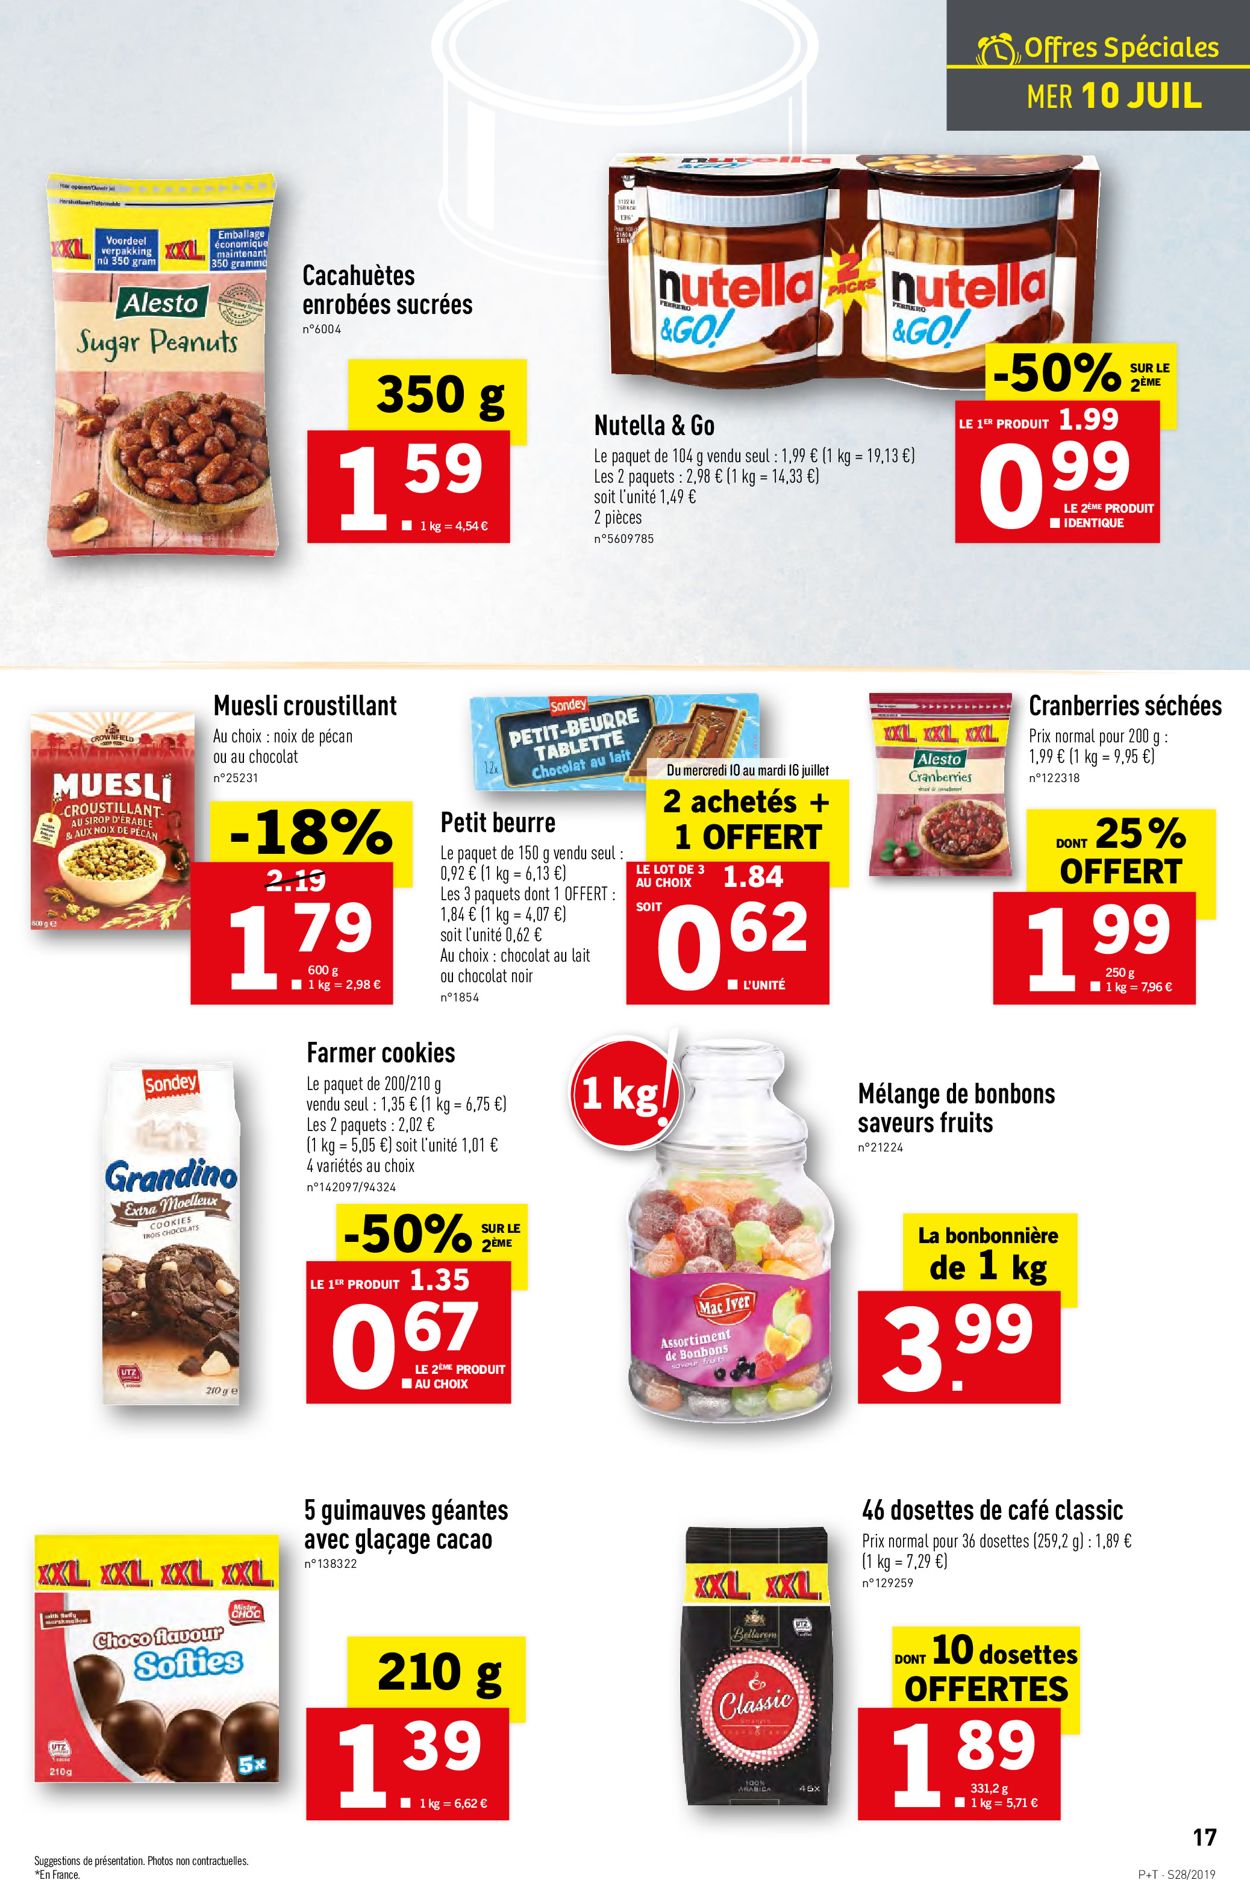 Lidl Catalogue - 10.07-16.07.2019 (Page 17)